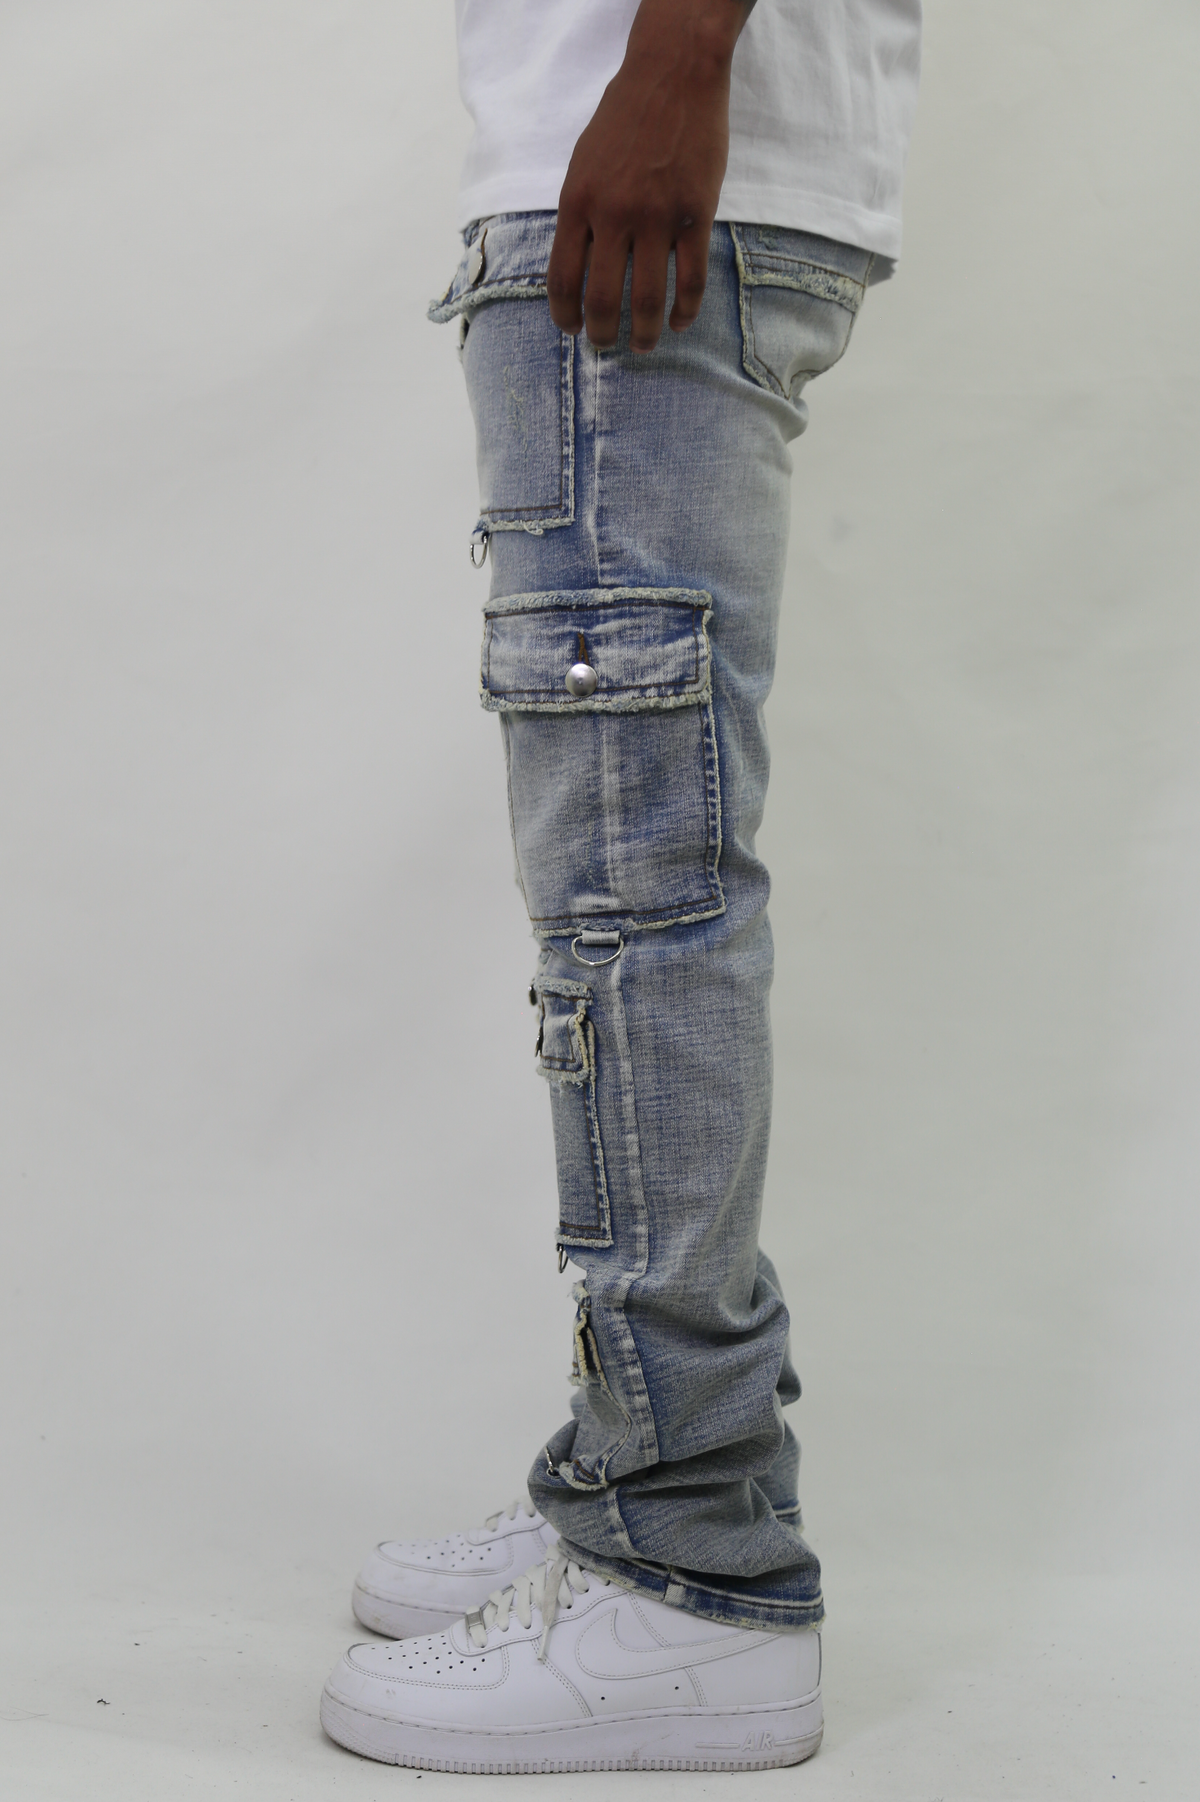 Stacked jeans are THE look of 2023 